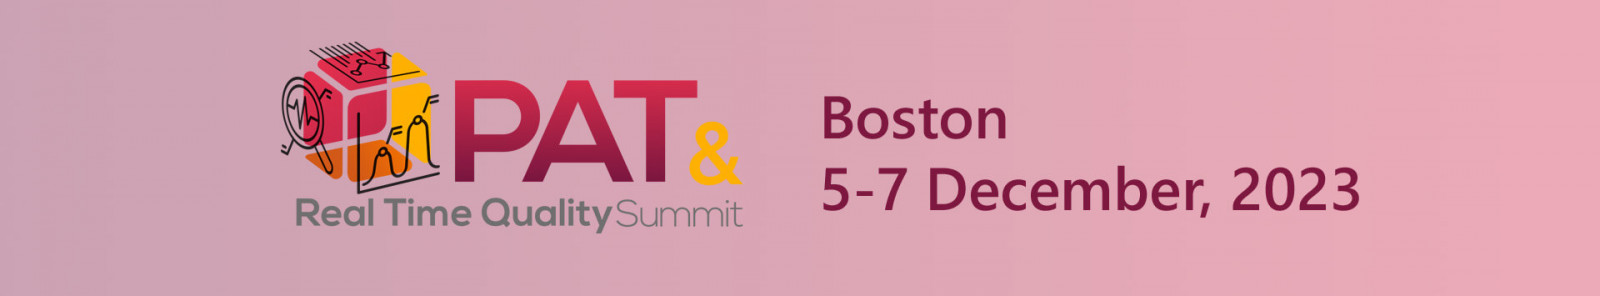 2nd PAT & Real Time Quality Summit, Boston